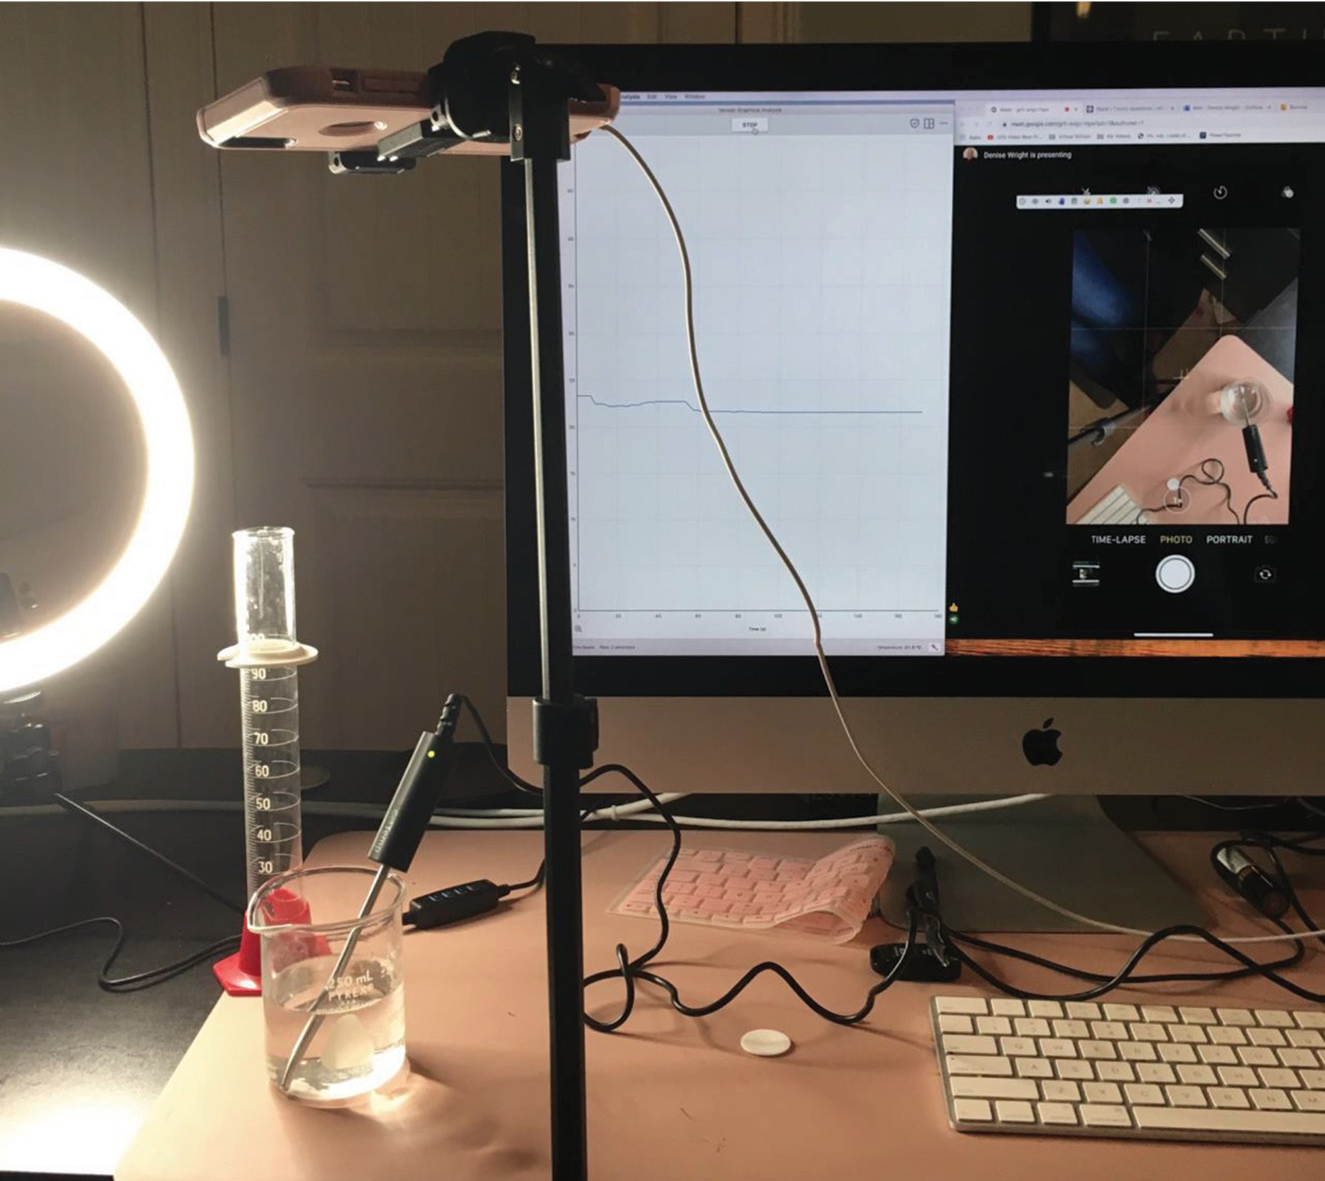 |	Figure 2: A beaker of sodium bicarbonate, water, and a thermometer sensor is placed on screen so students may view their teacher performing the endothermic reaction in real time.